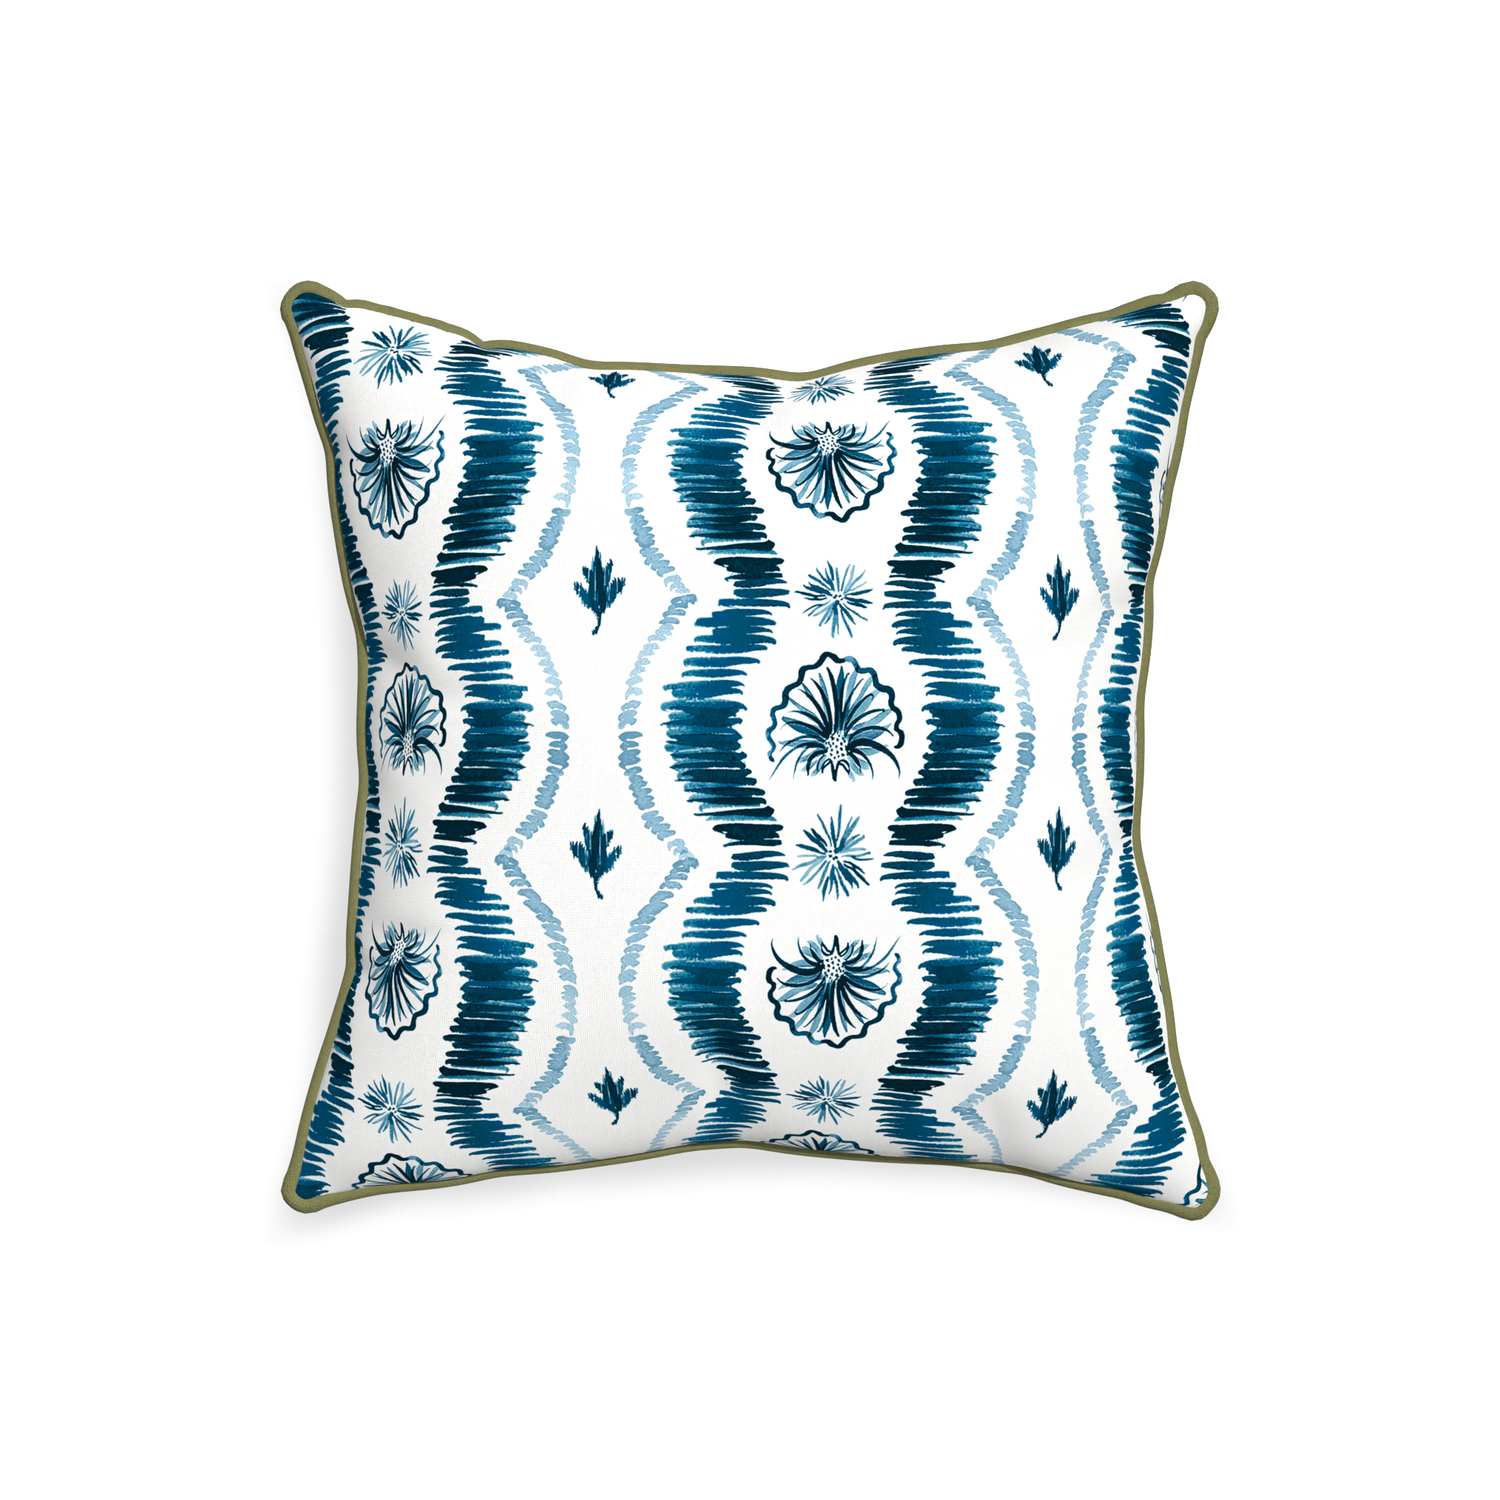 20-square alice custom blue ikatpillow with moss piping on white background